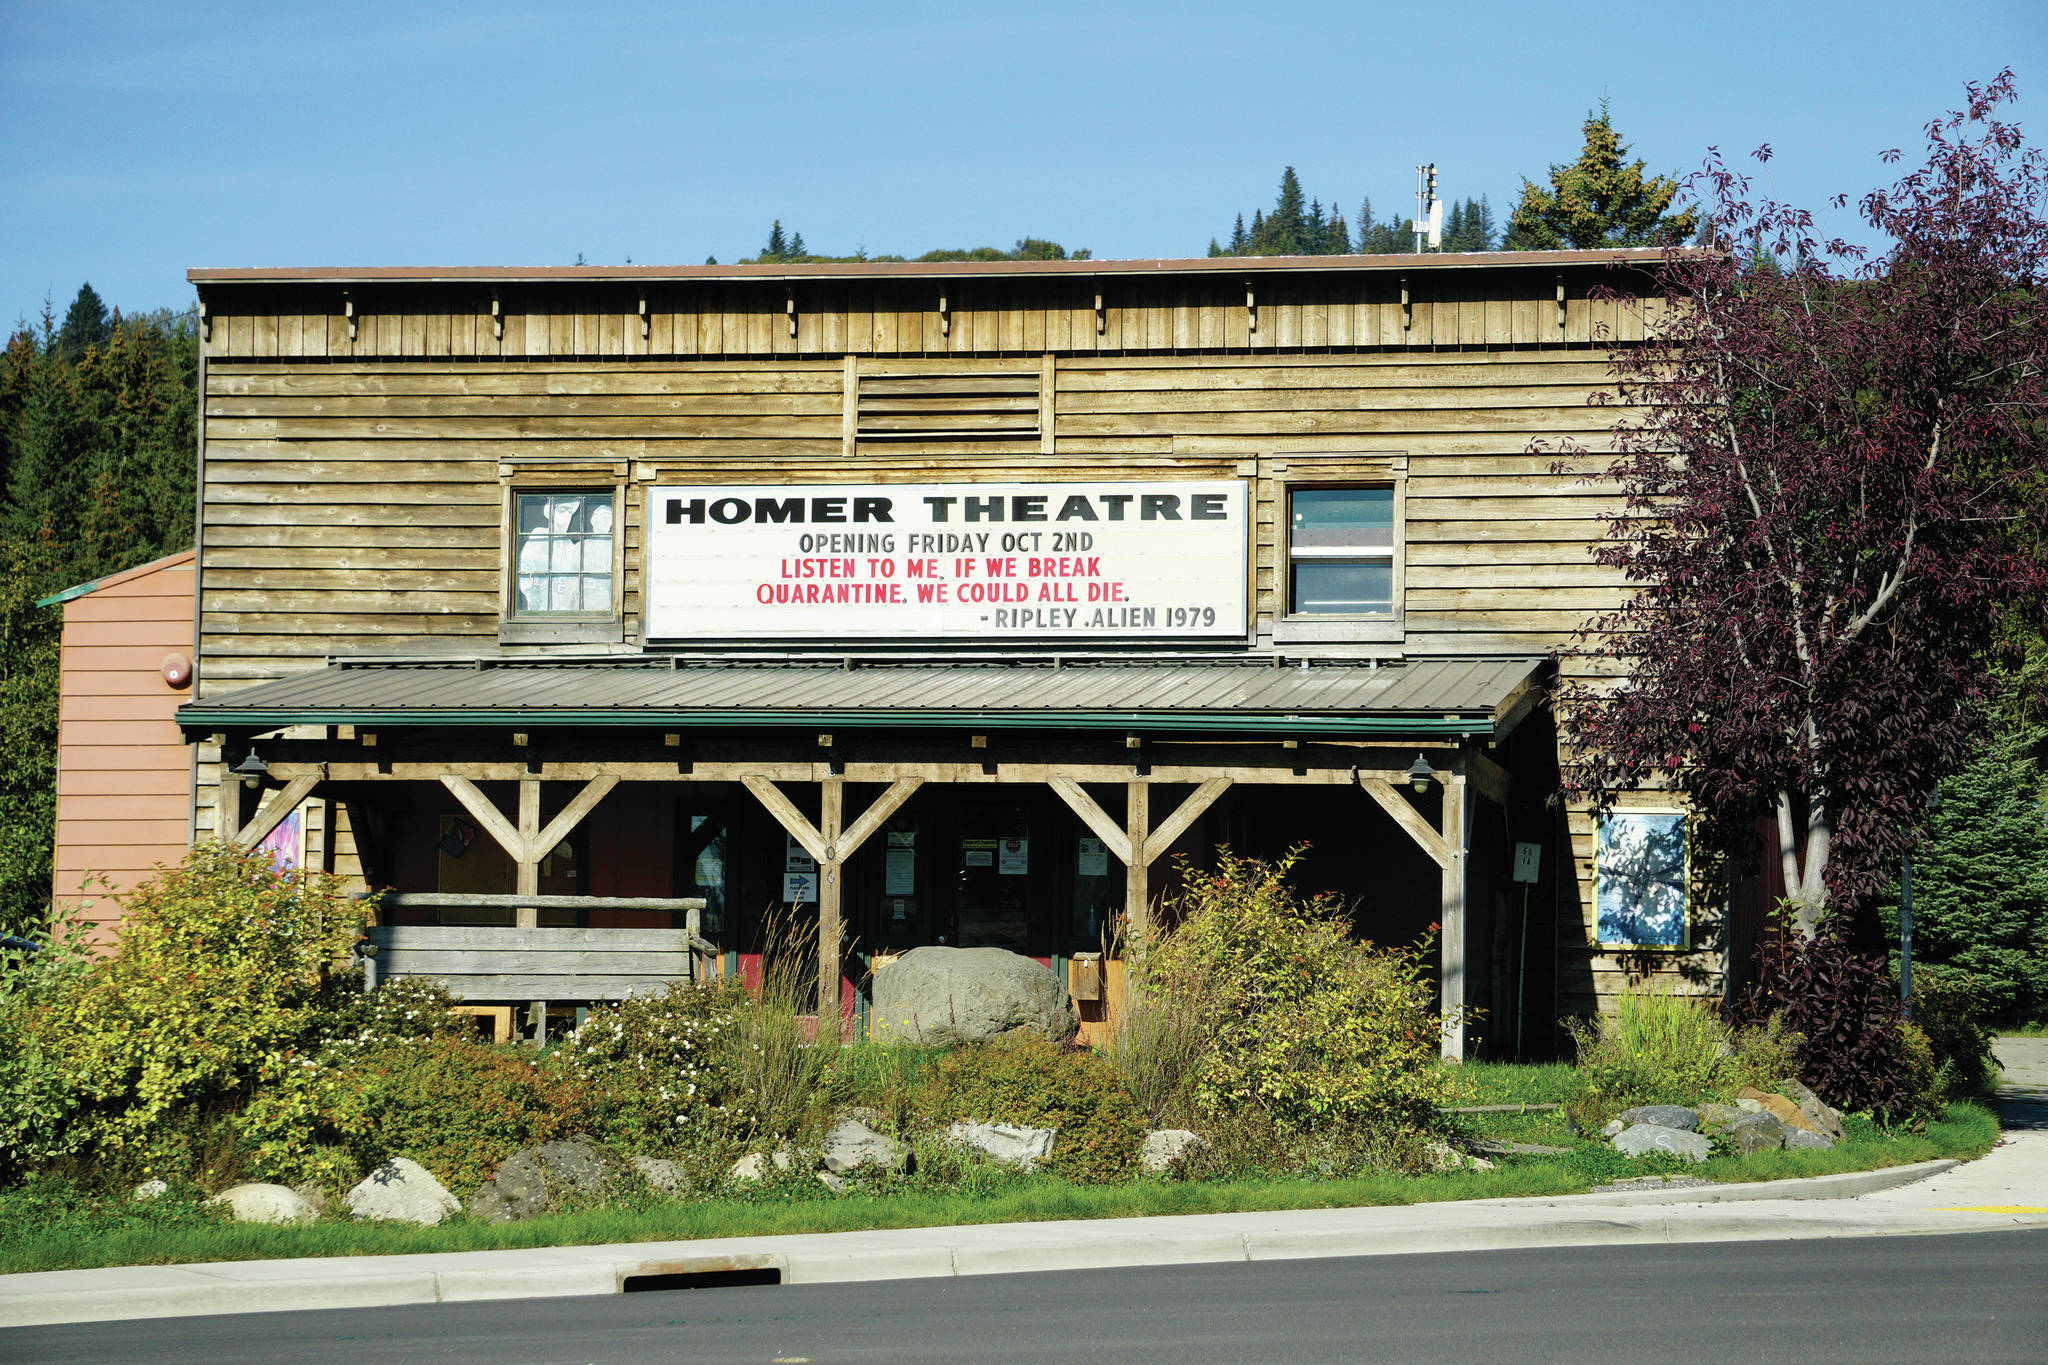 The Homer Theatre, as seen on Sept. 11, 2020, in Homer, Alaska. (Photo by Michael Armstrong/Homer News)